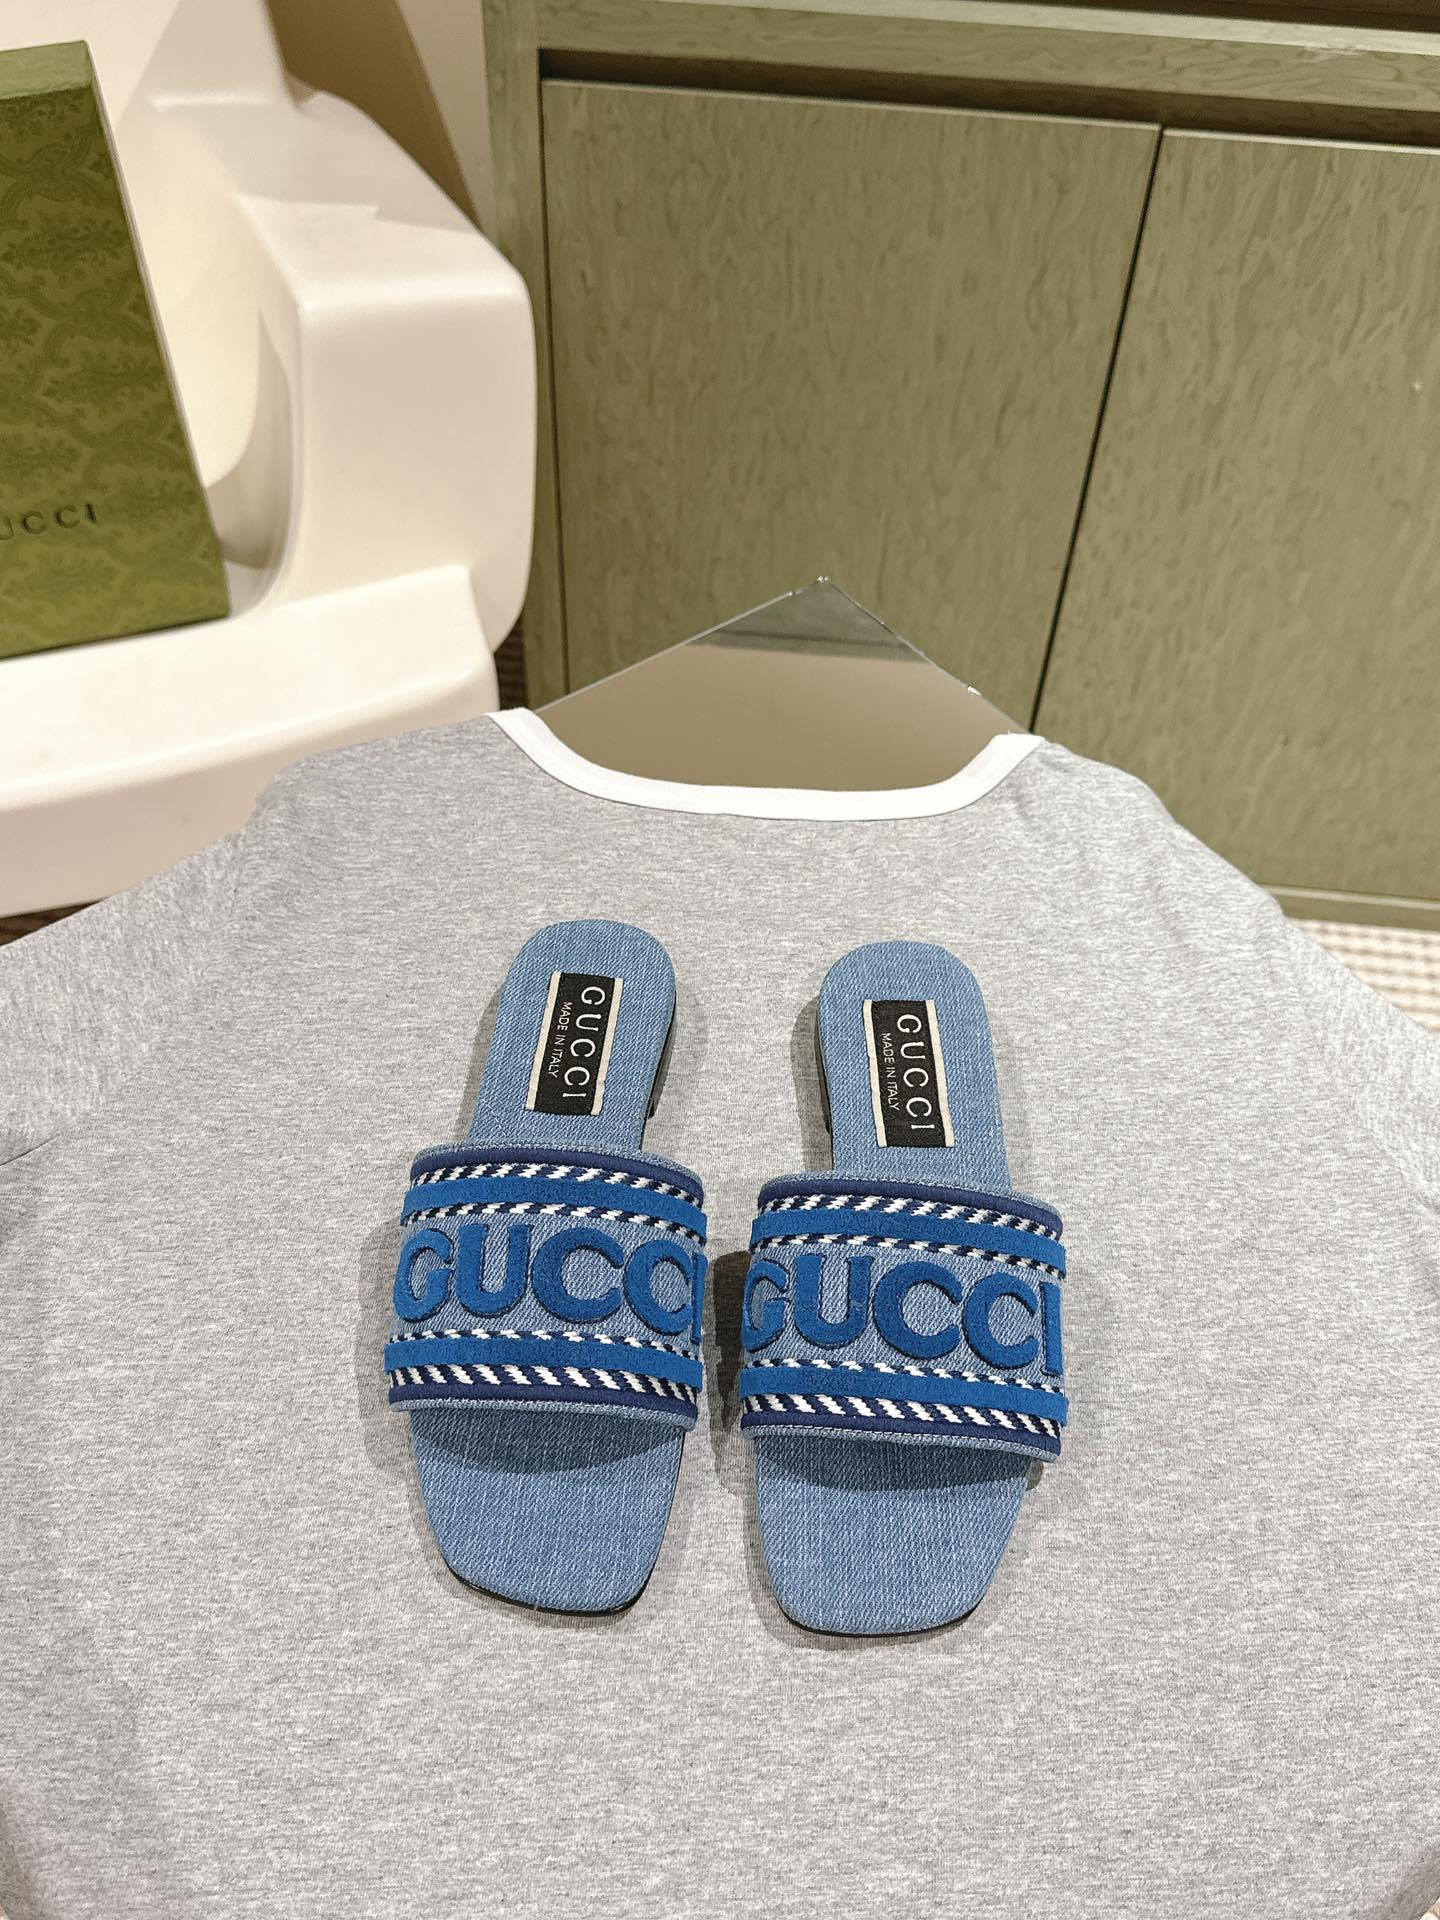 Gucci Shoes Slippers Embroidery Denim Genuine Leather Sheepskin Summer Collection Fashion